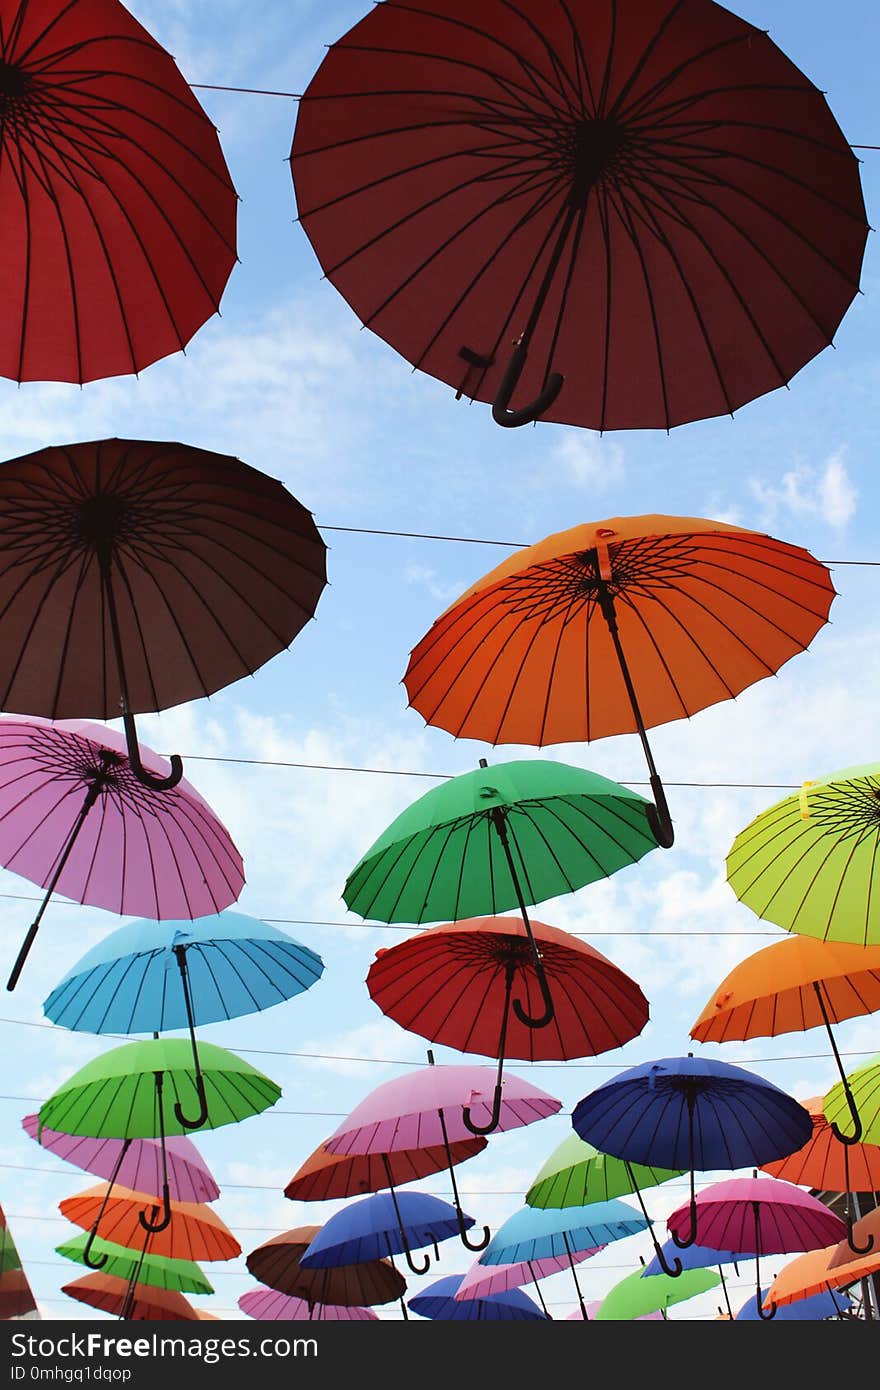 Street installation with colorful, beautiful umbrellas floating in the air against the sky, close-up as a background. Street installation with colorful, beautiful umbrellas floating in the air against the sky, close-up as a background.